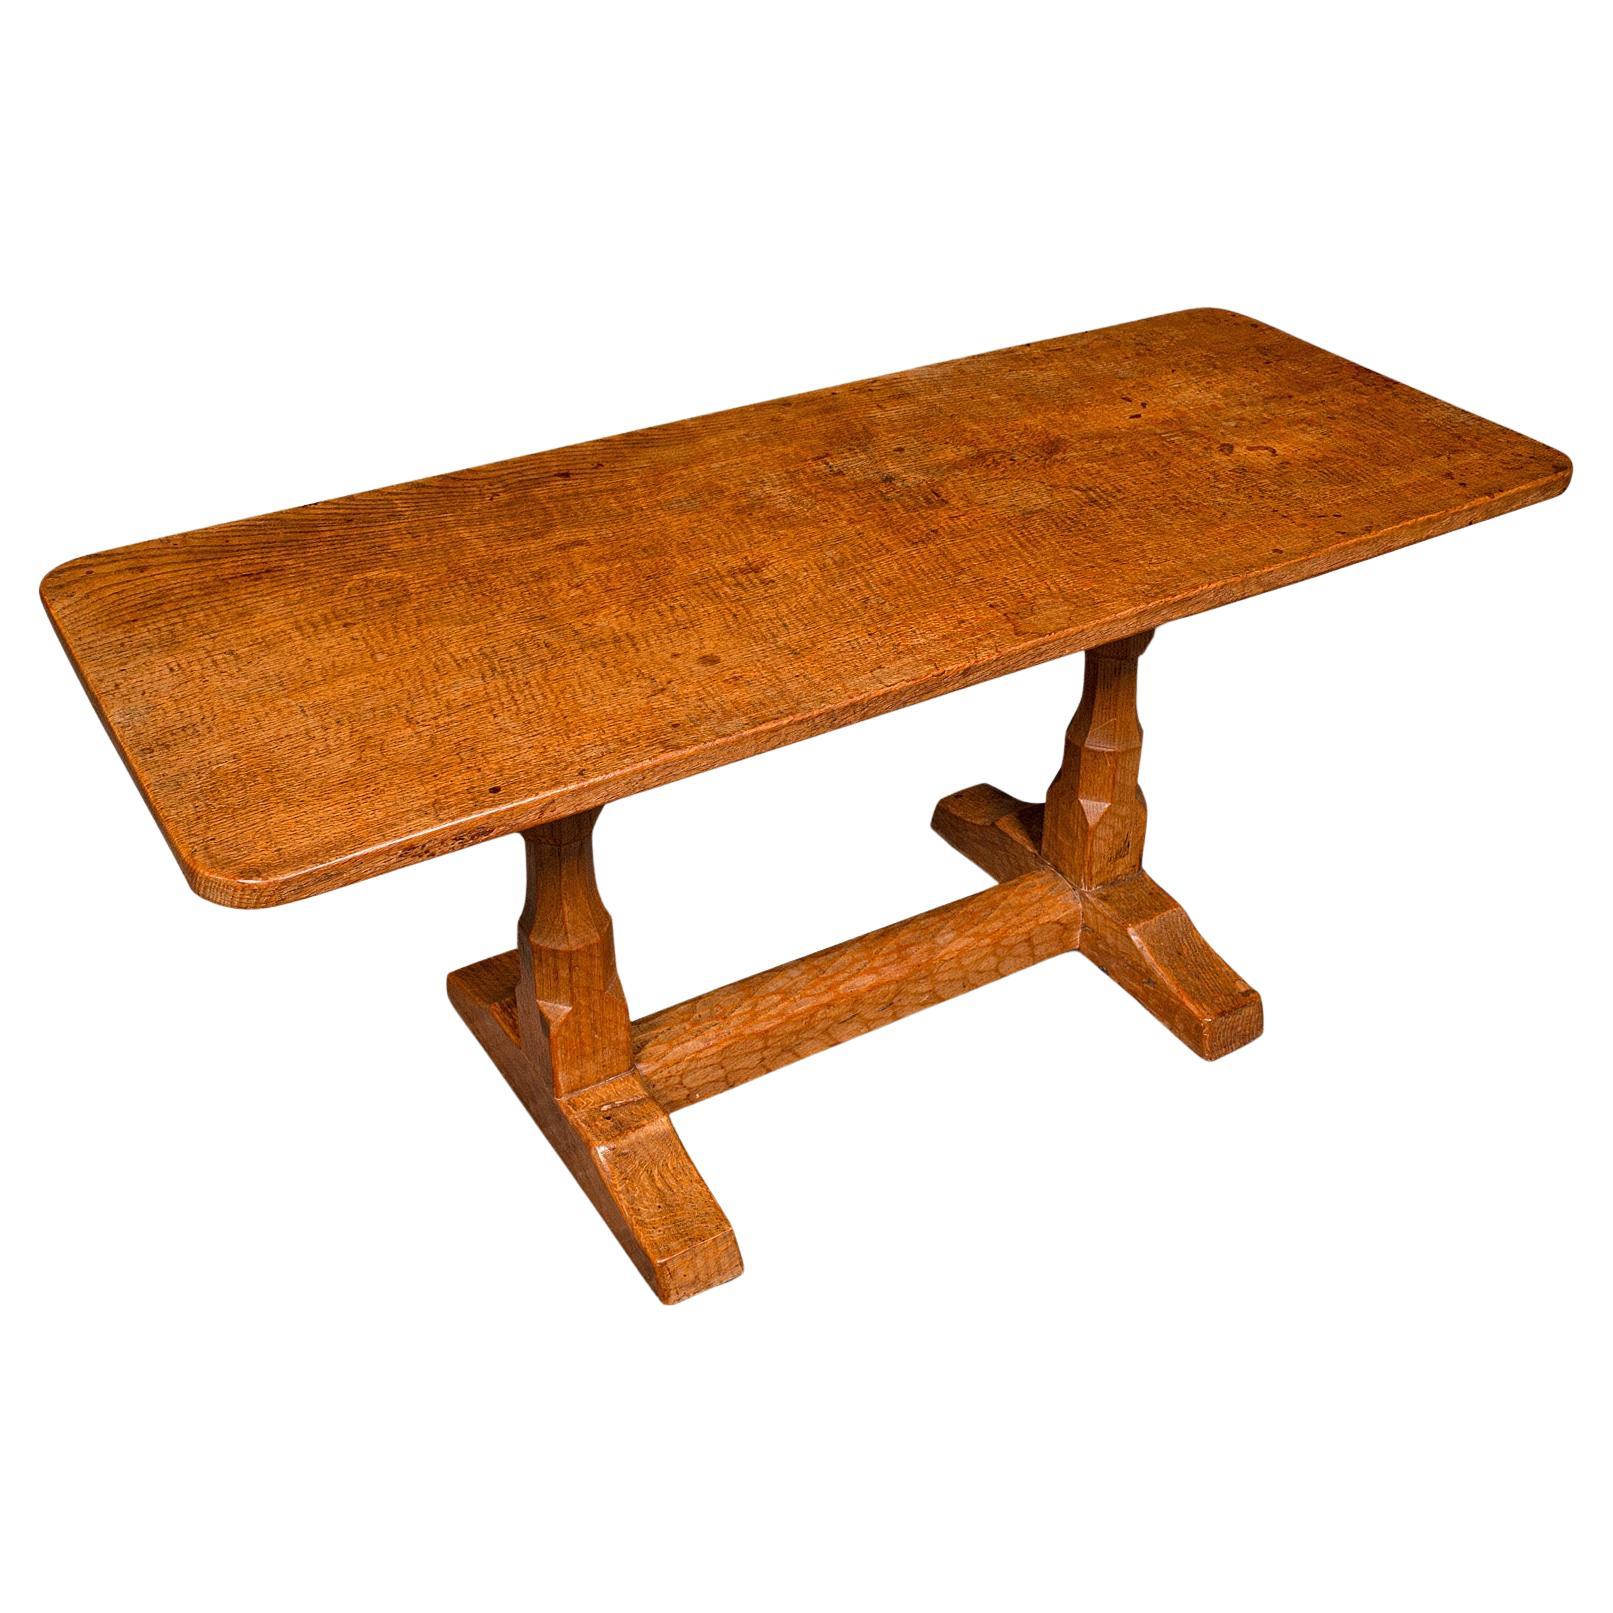 Vintage Coffee Table, English Oak, Cotswold School, After Mouseman, 20th Century For Sale